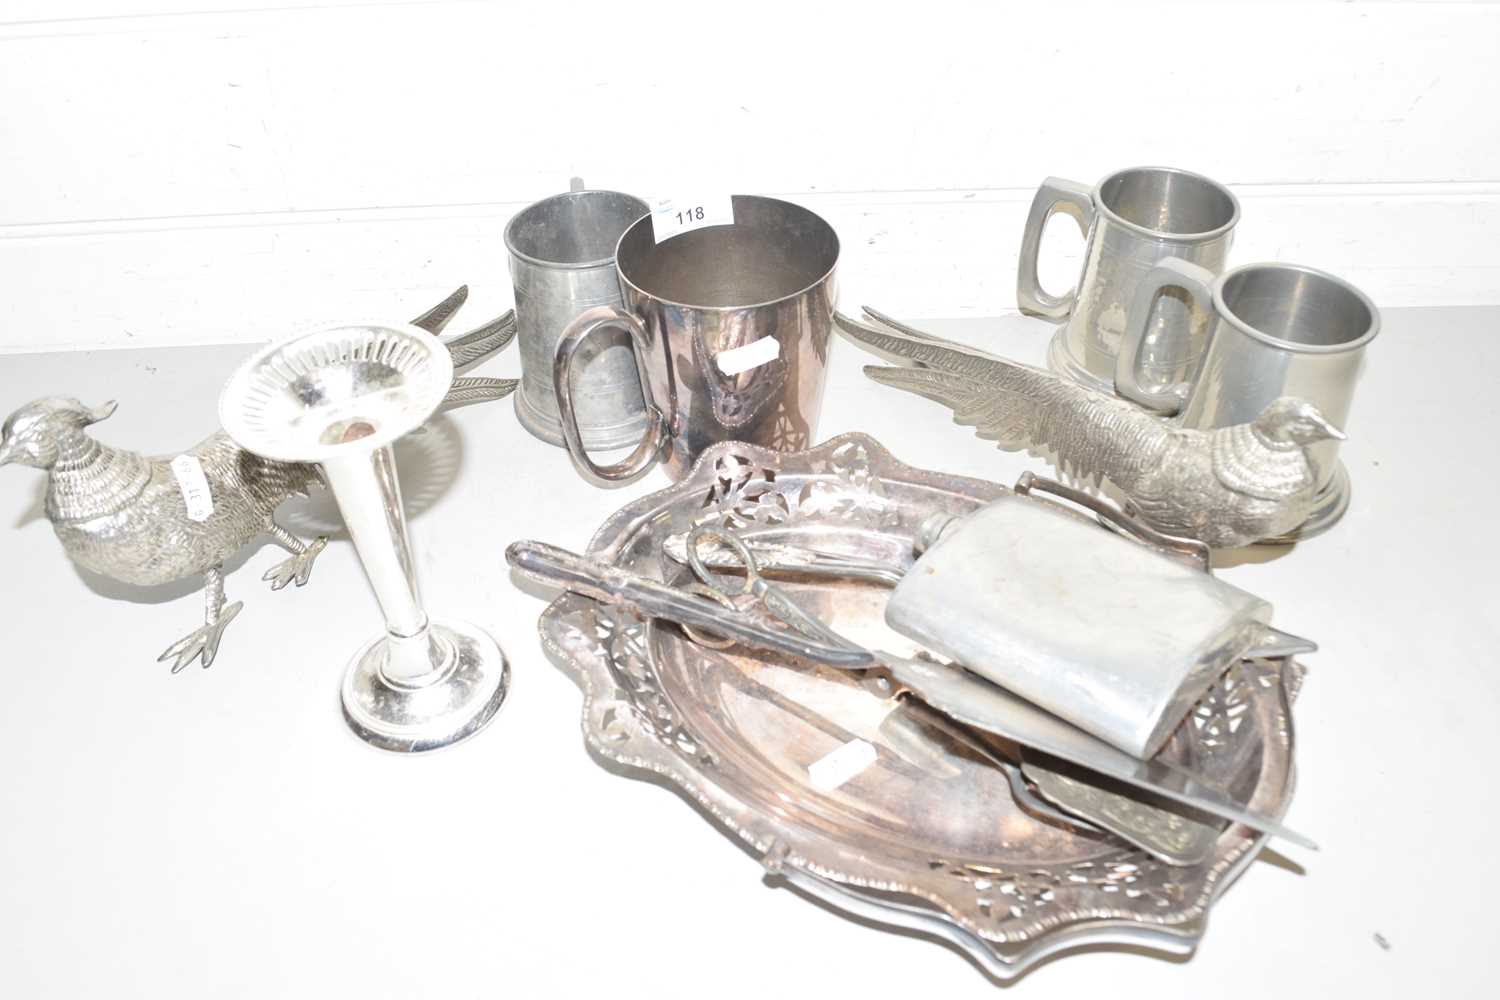 Mixed Lot: Pewter tankard, silver plated wares, a pair of table pheasants, table decorations,